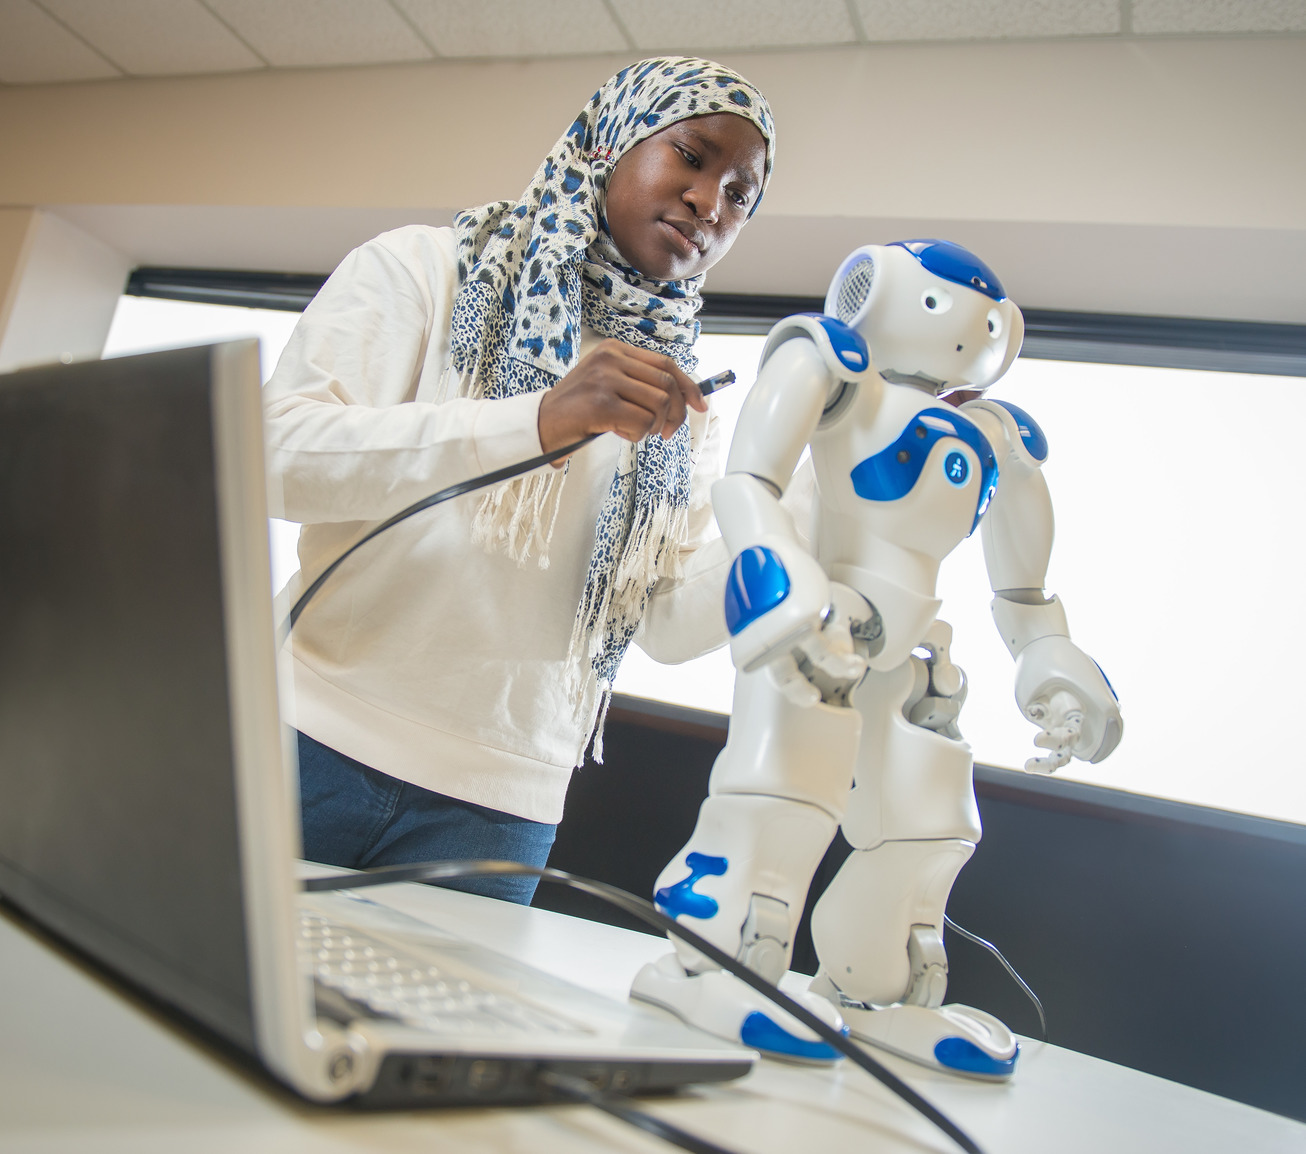 Student with robot and computer